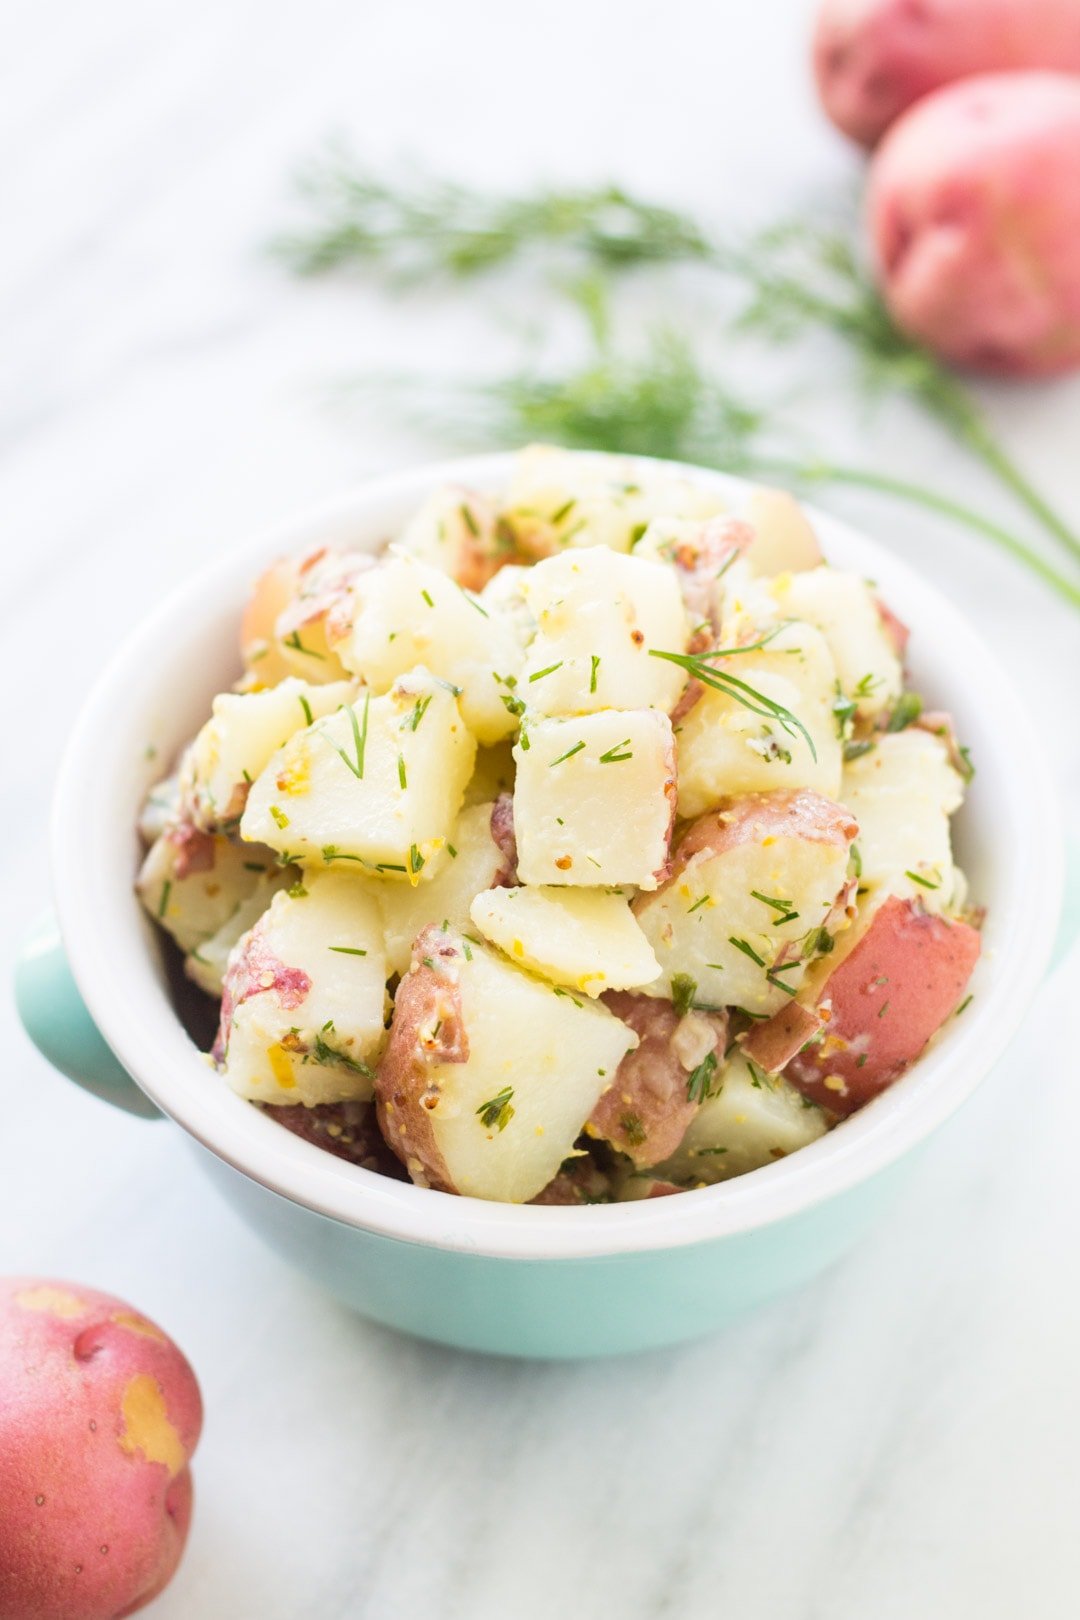 Light blue bowl filled with a cold potato salad flavored with lemon and dill.